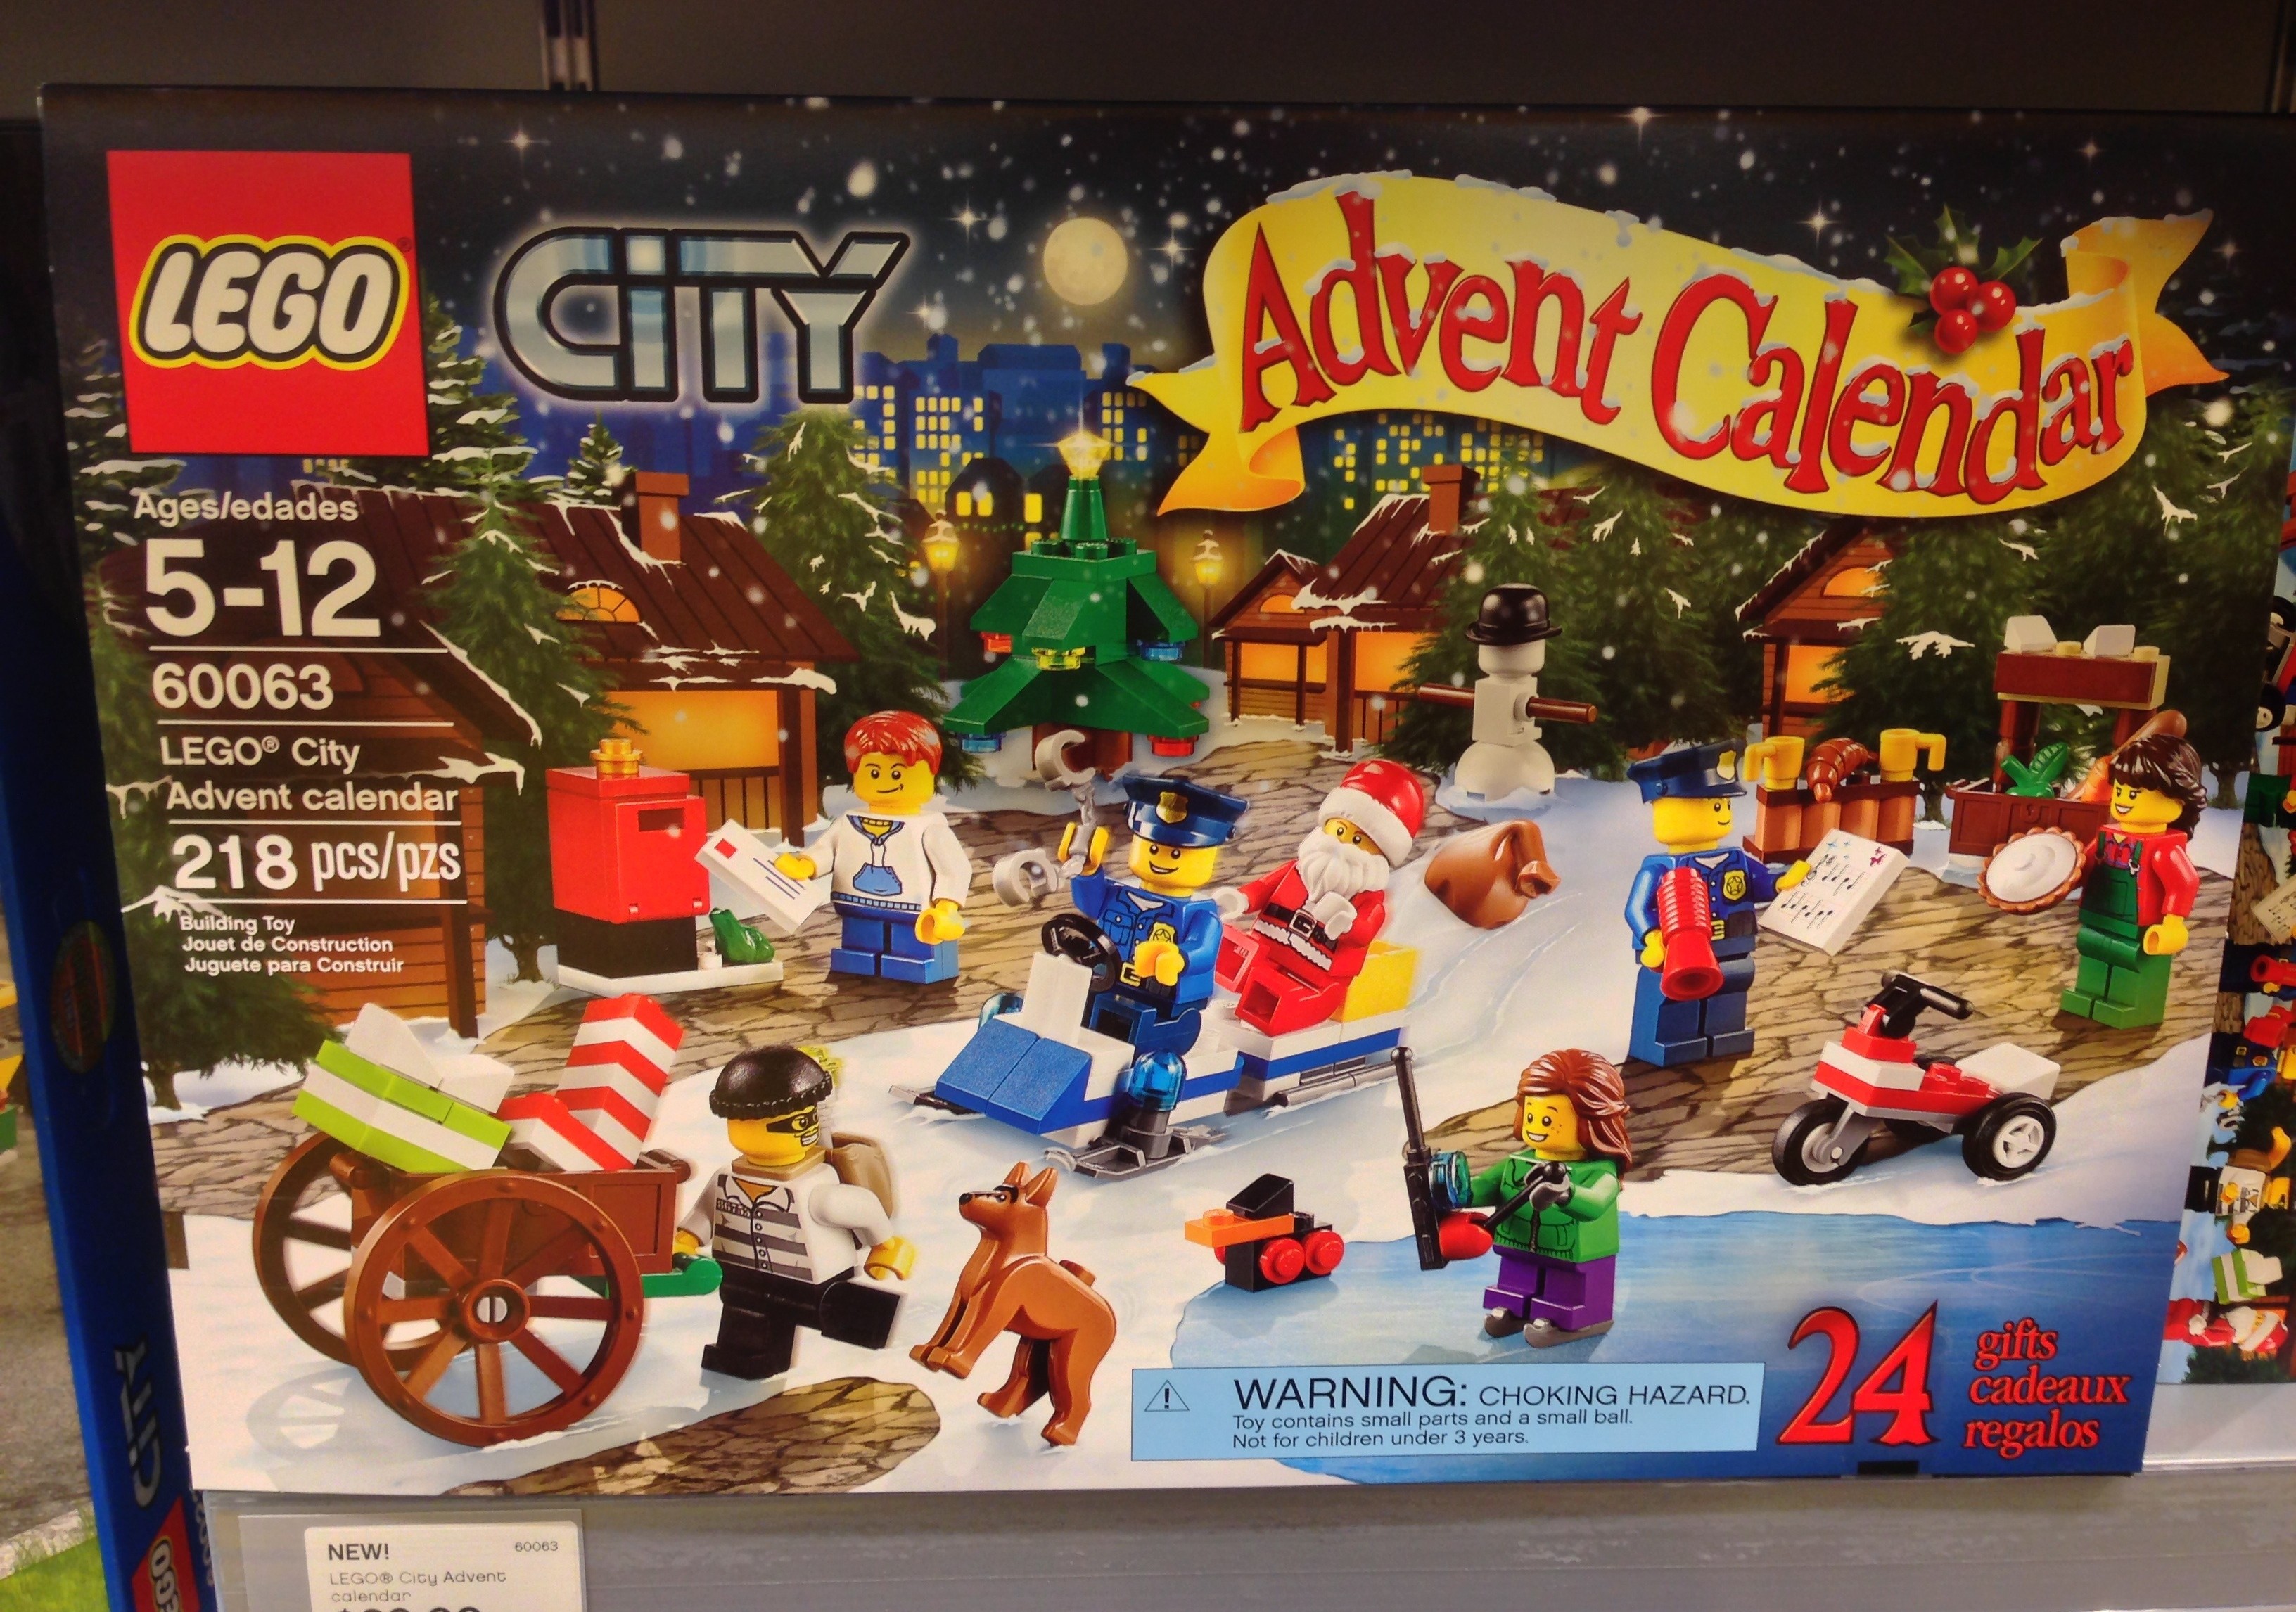 LEGO City Advent Calendar Released in Stores & Photos! - Bricks and Bloks